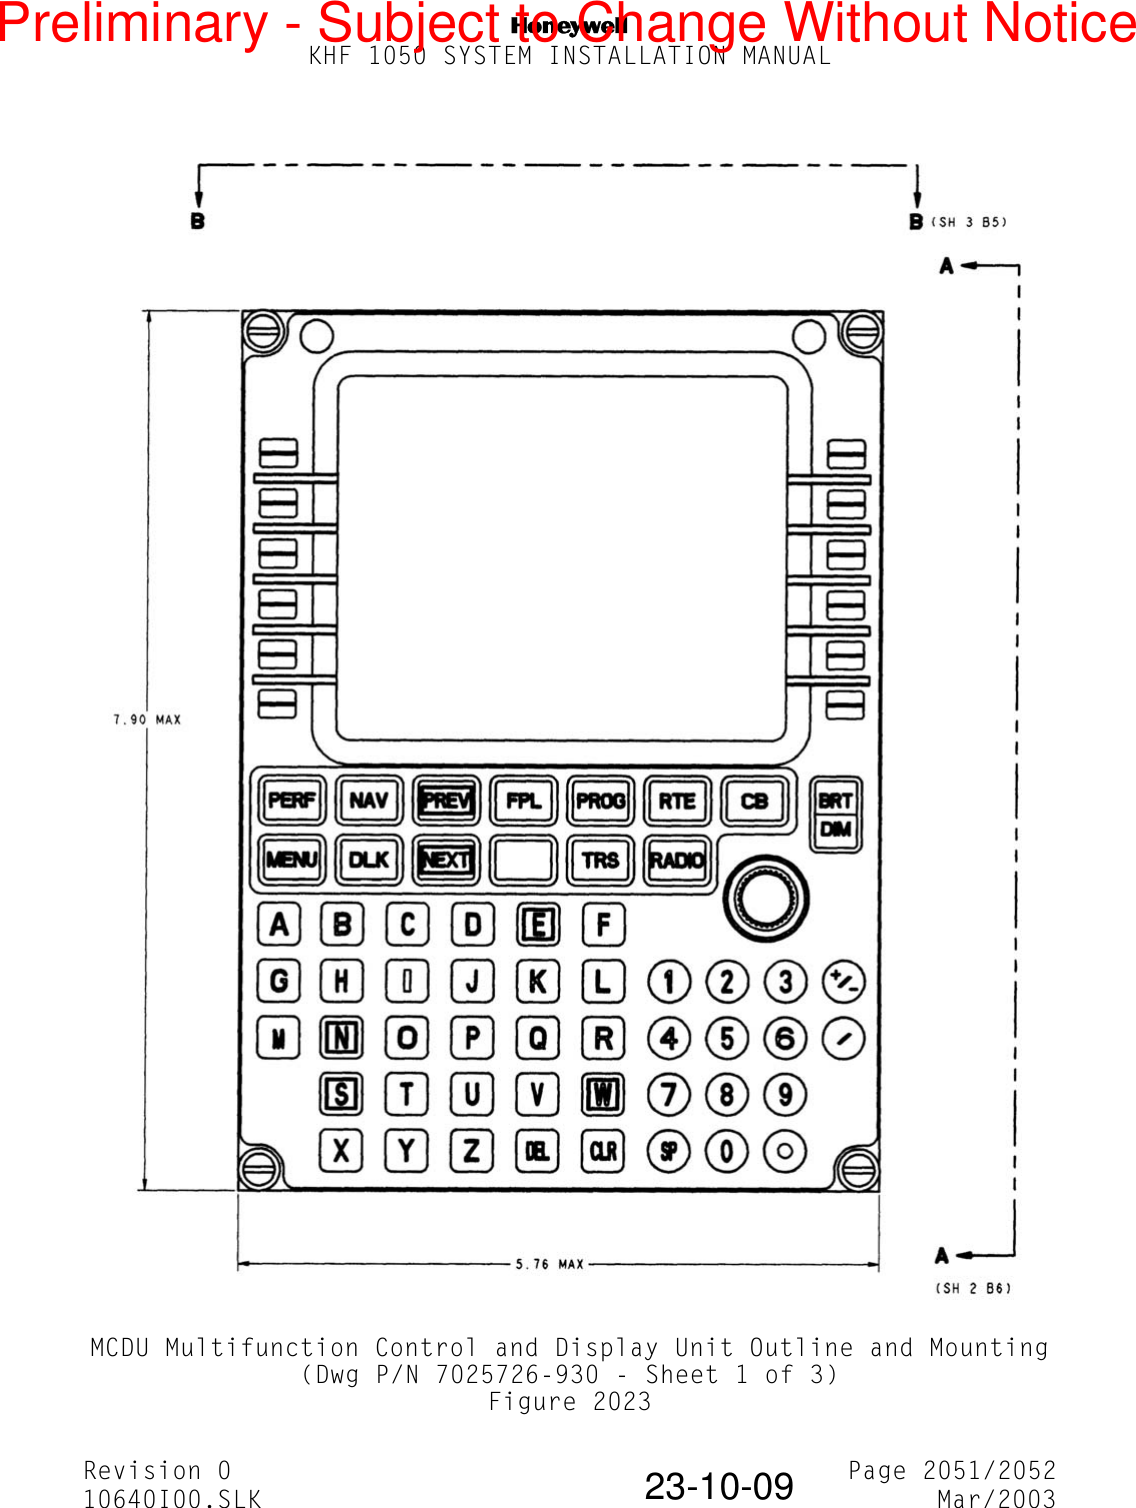 NKHF 1050 SYSTEM INSTALLATION MANUALRevision 0 Page 2051/205210640I00.SLK Mar/200323-10-09MCDU Multifunction Control and Display Unit Outline and Mounting(Dwg P/N 7025726-930 - Sheet 1 of 3)Figure 2023Preliminary - Subject to Change Without Notice